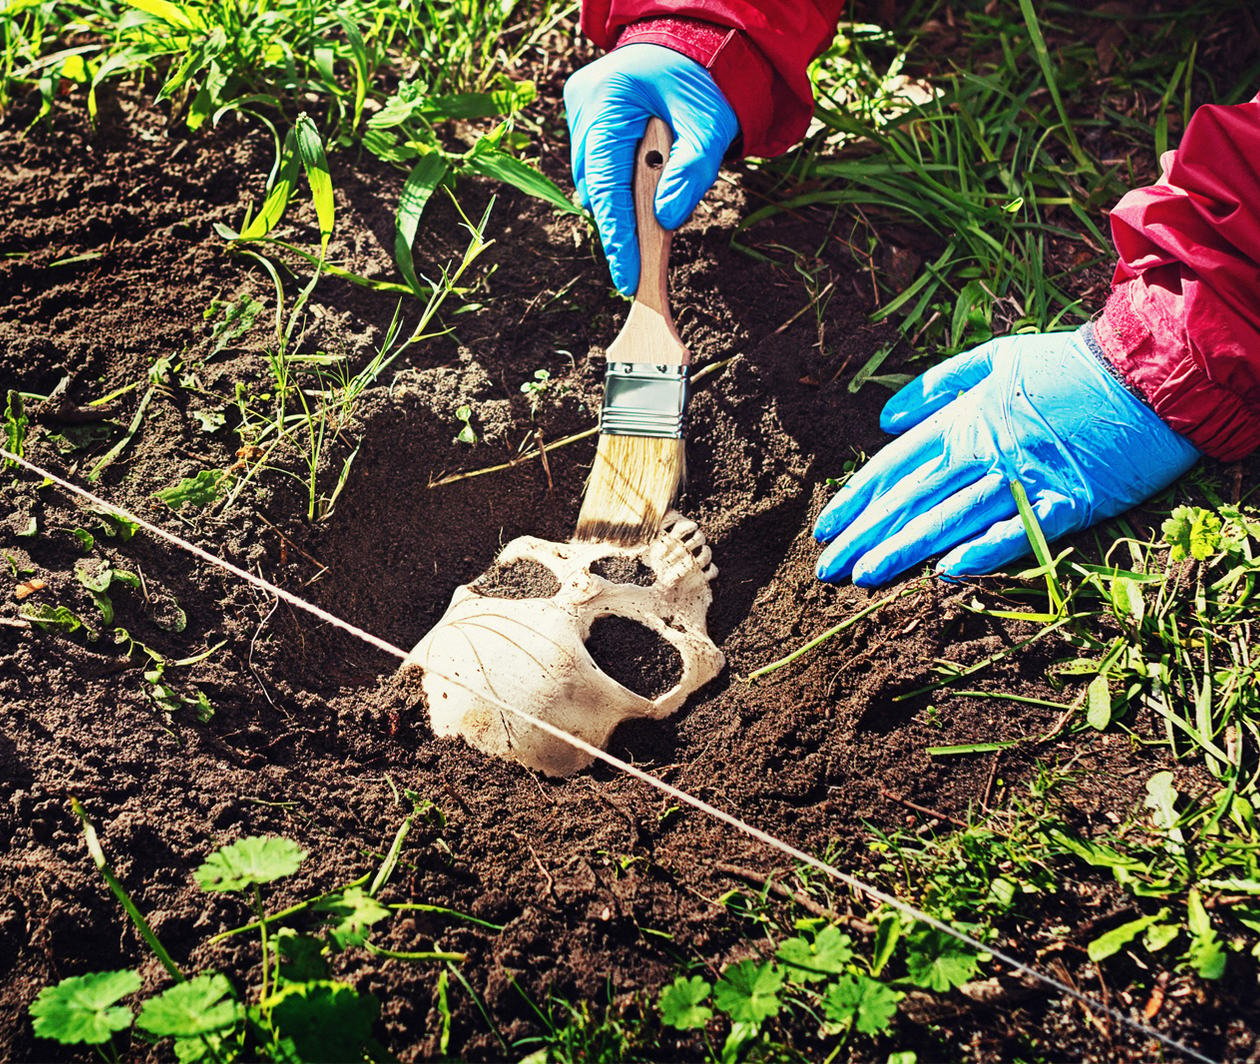 A person wearing blue gloves and red clothing brushing away dirt from a partially buried cast of a human skull.